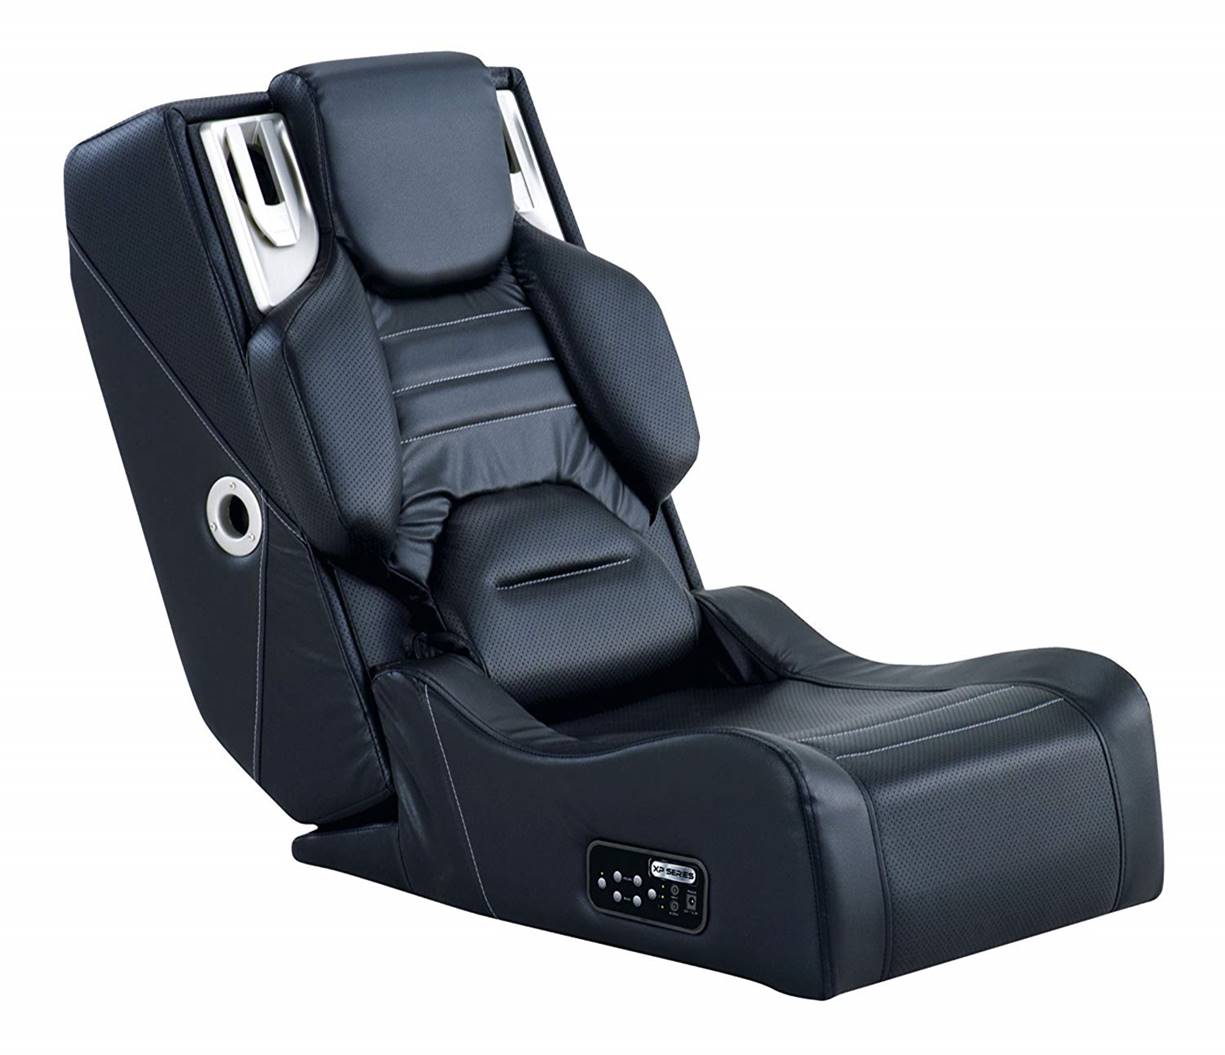 Cohesion XP 11.2 Gaming Chair with Speakers